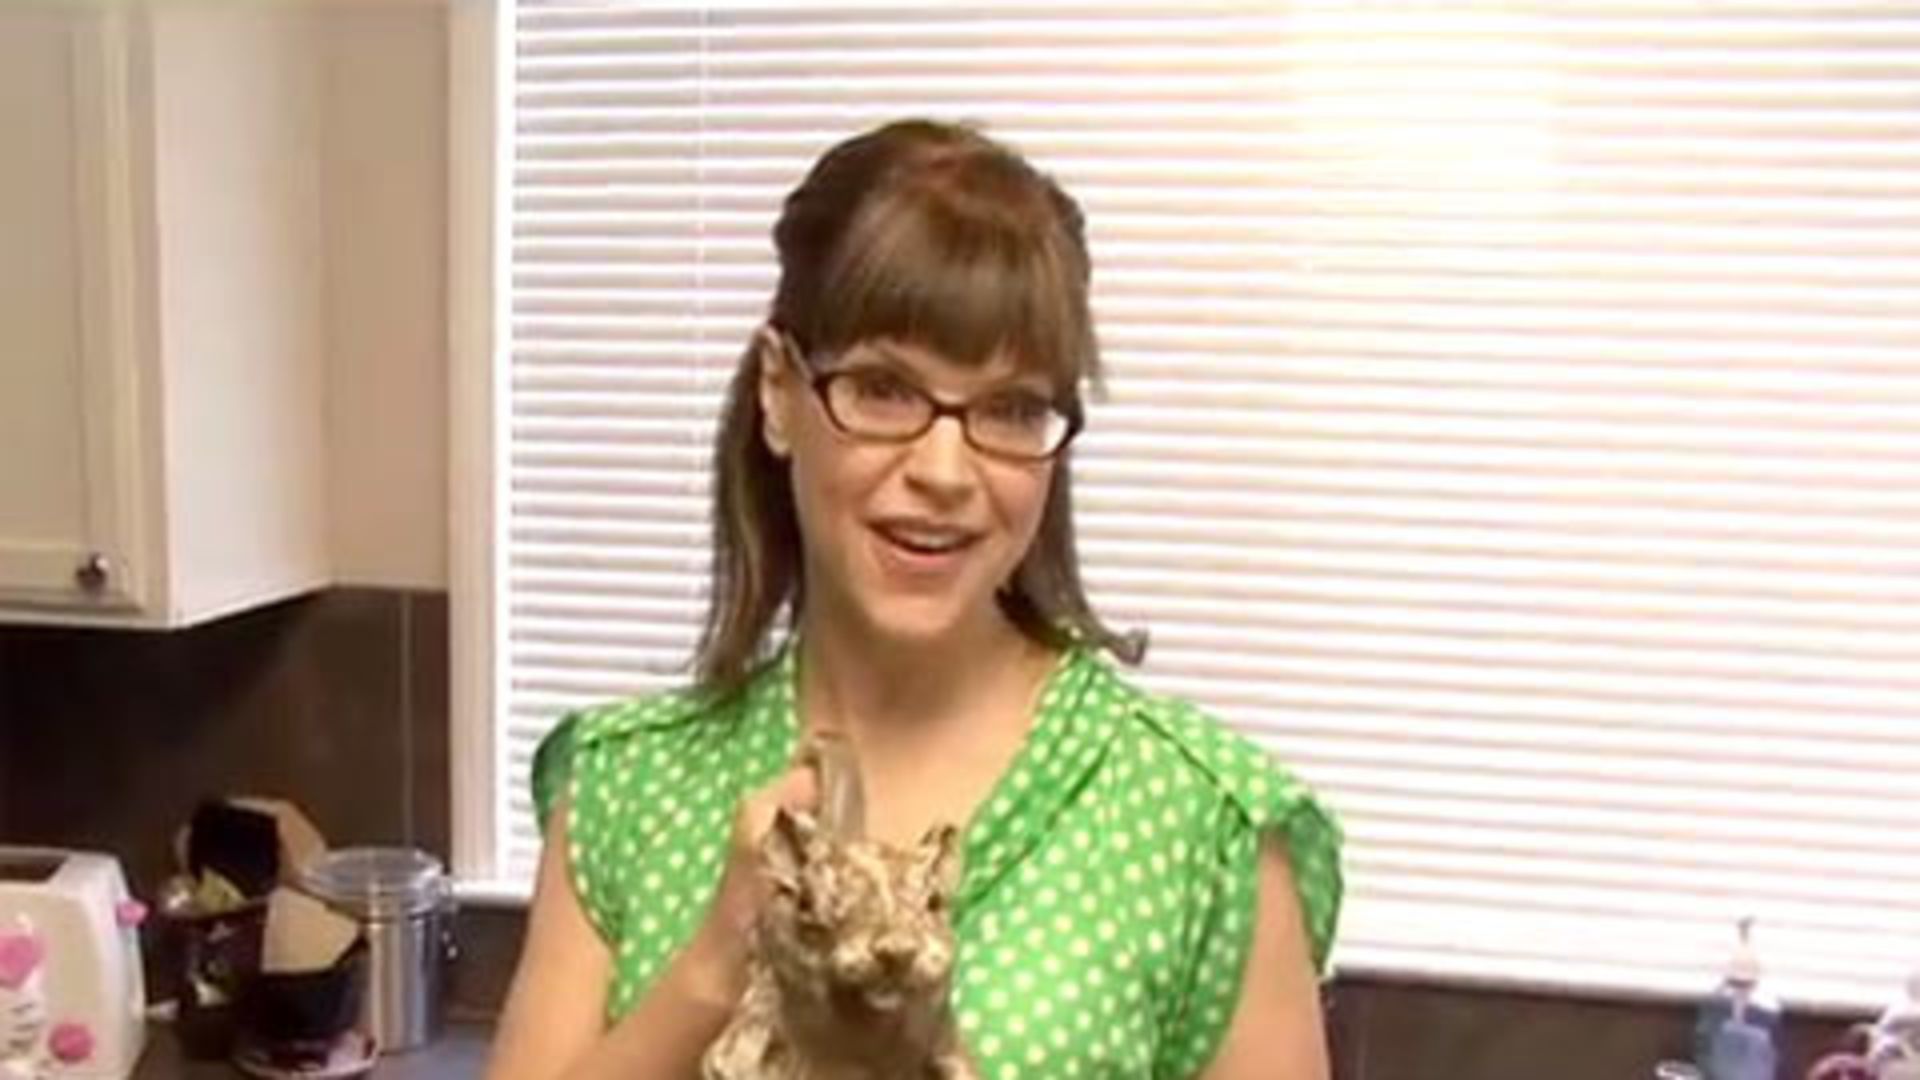 Is that really Lisa Loeb in the Geico commercial?